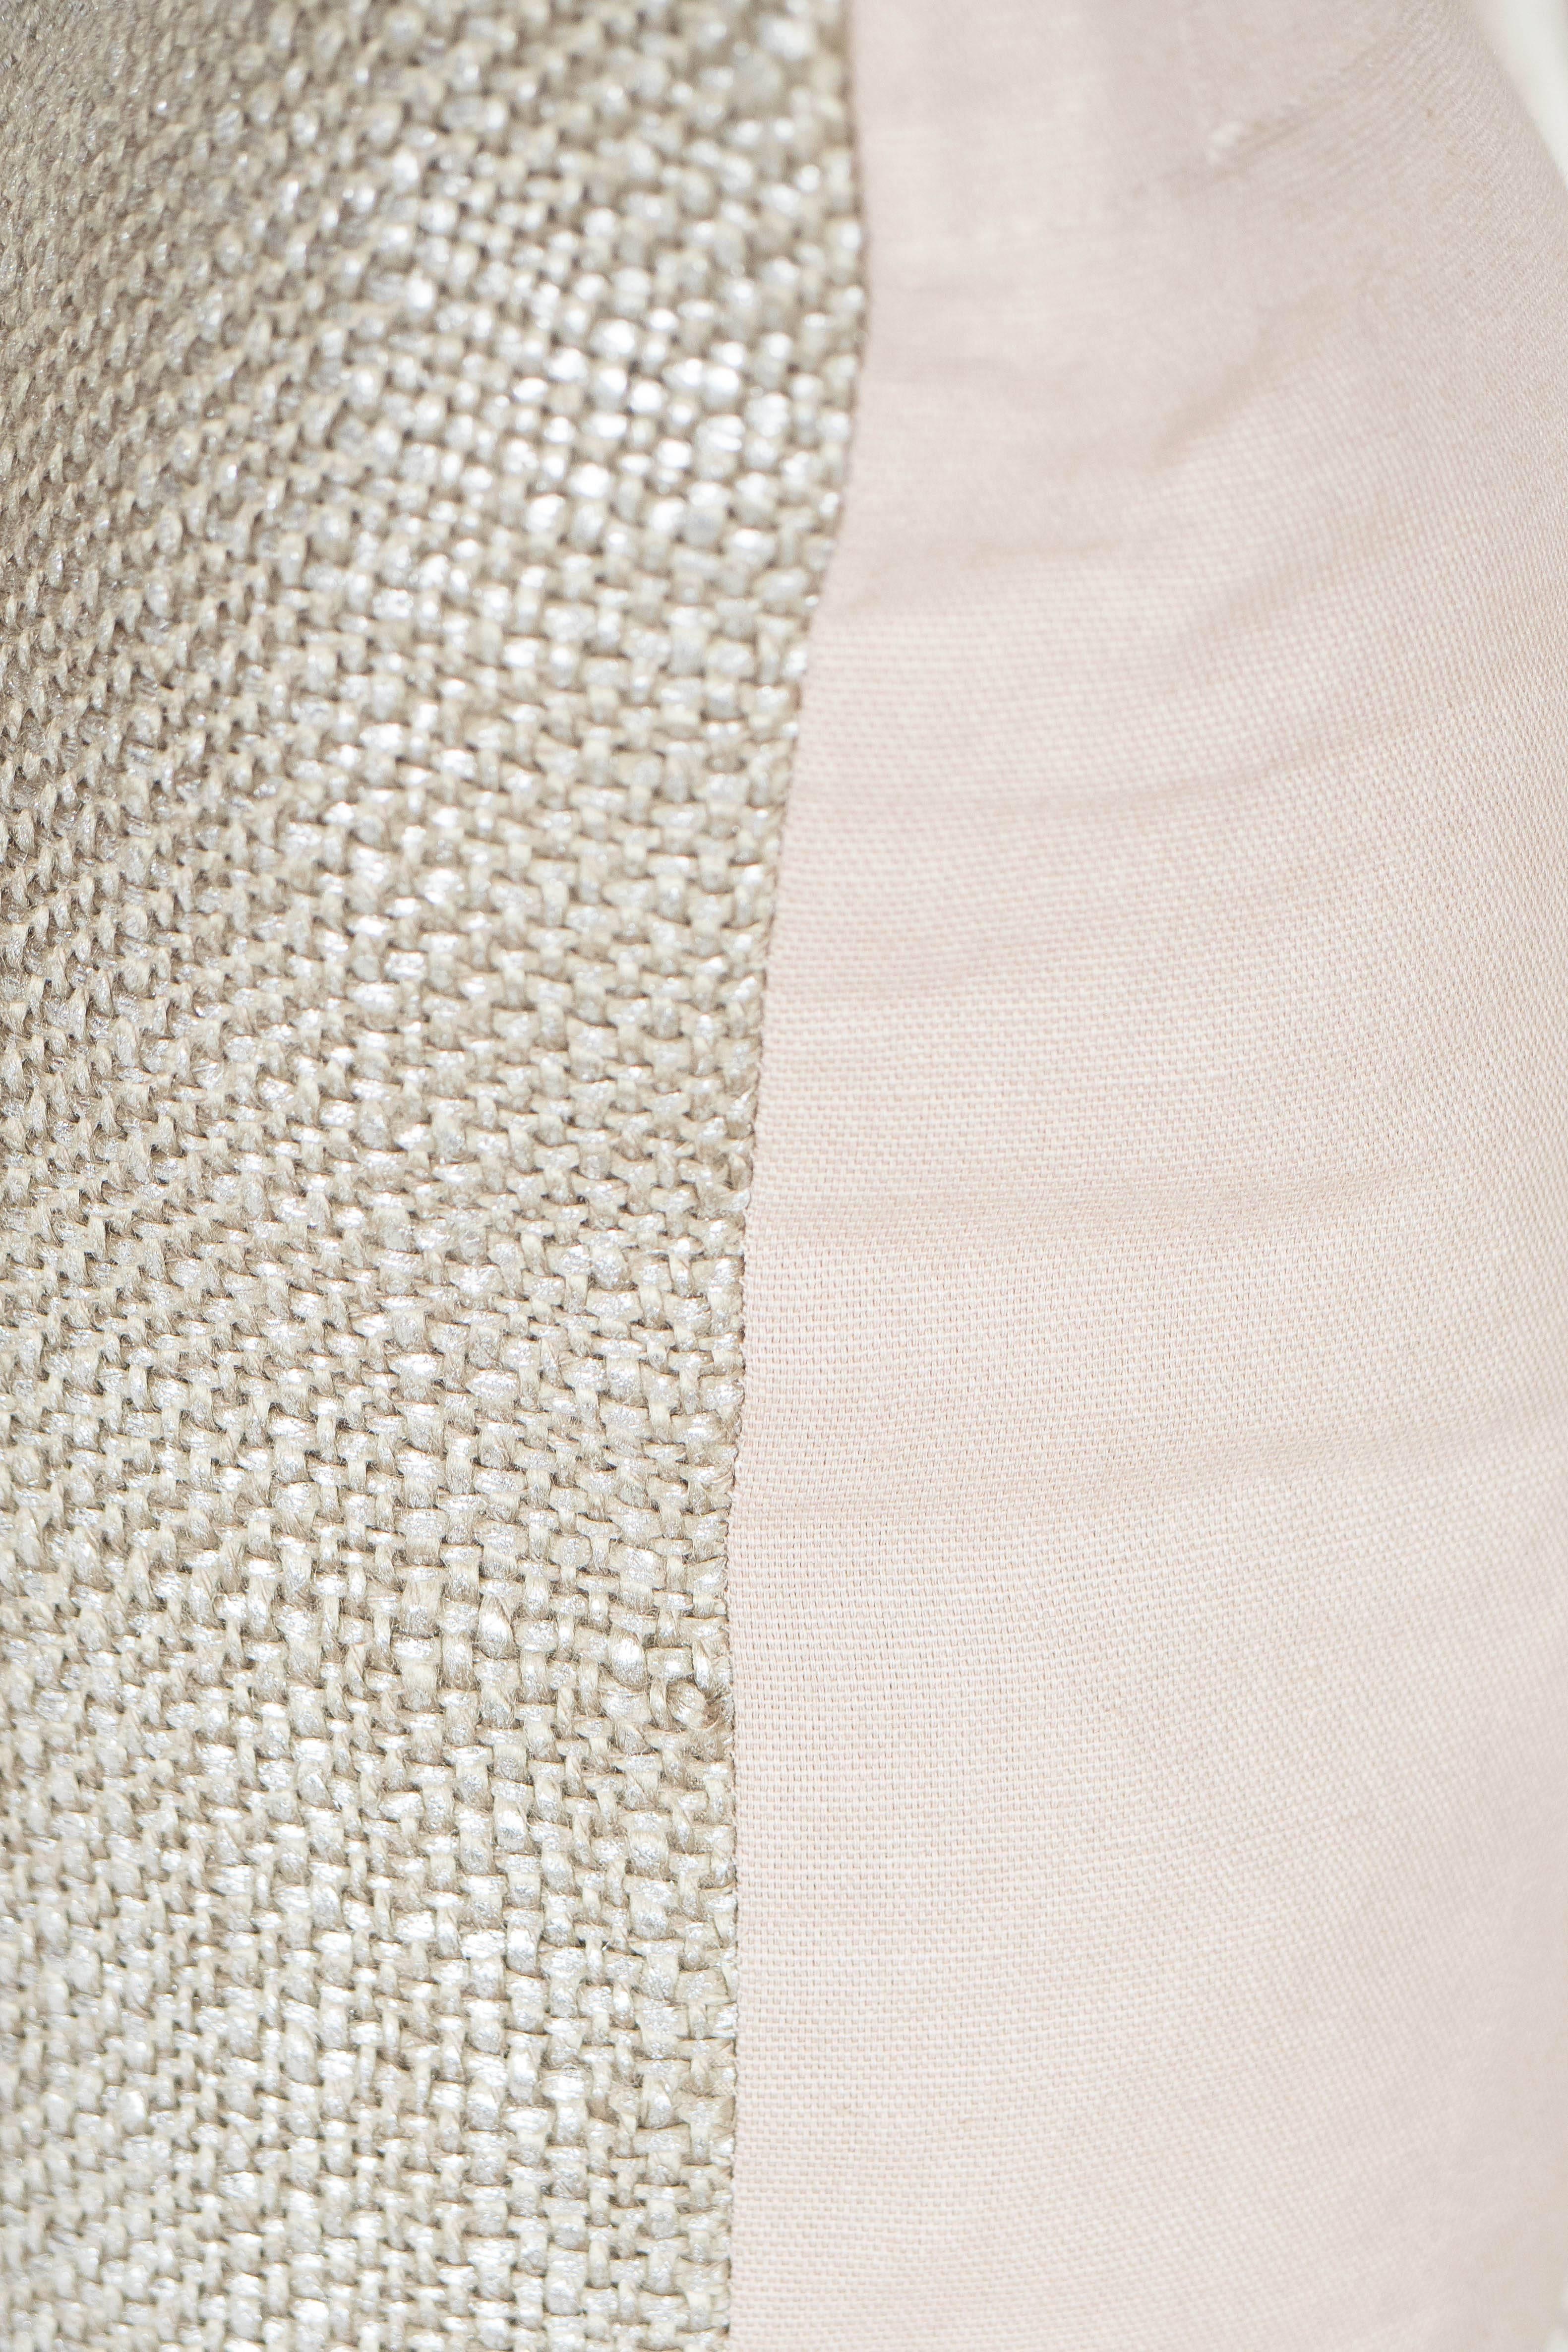 Custom Textured Woven Metallic Platinum Pillow with Linen Backing In Excellent Condition For Sale In New York, NY